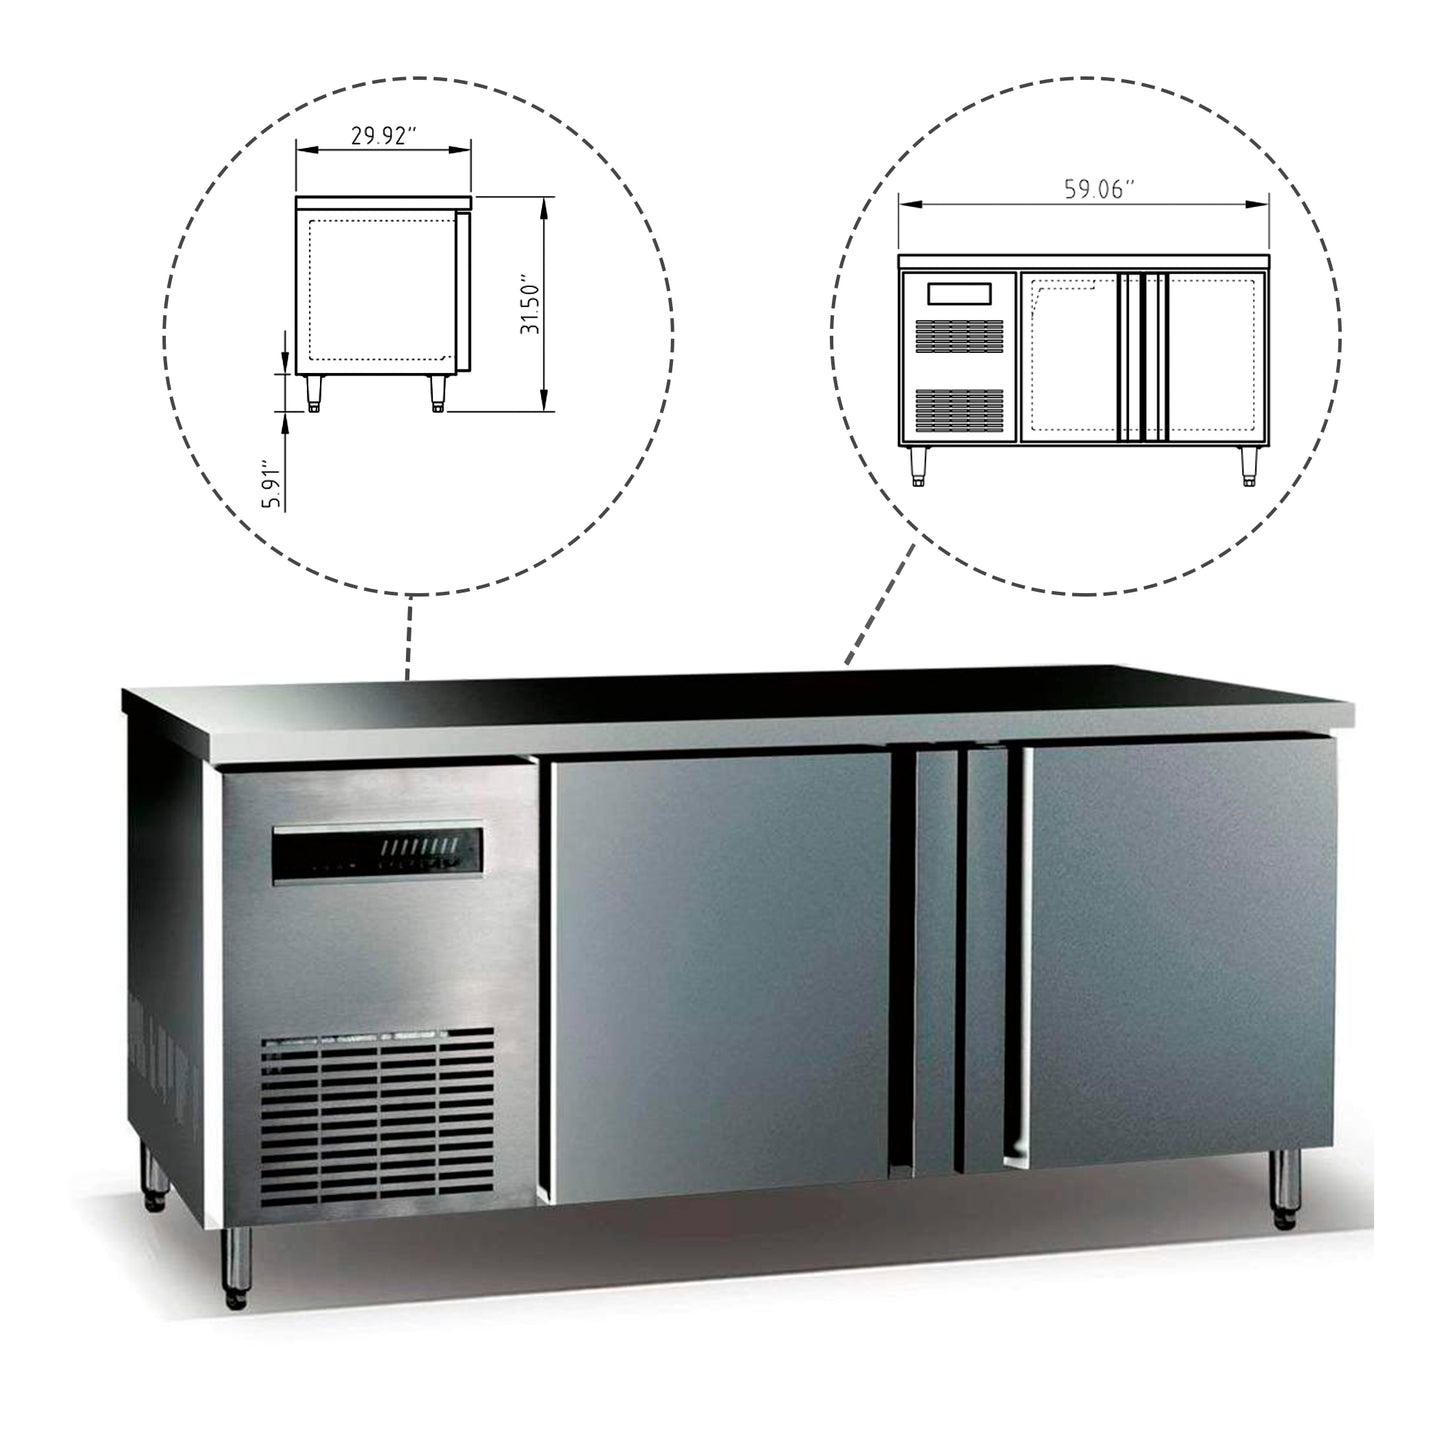 A stainless steel commercial kitchen appliance with adjustable shelves and ample capacity for storing bottles and cans.